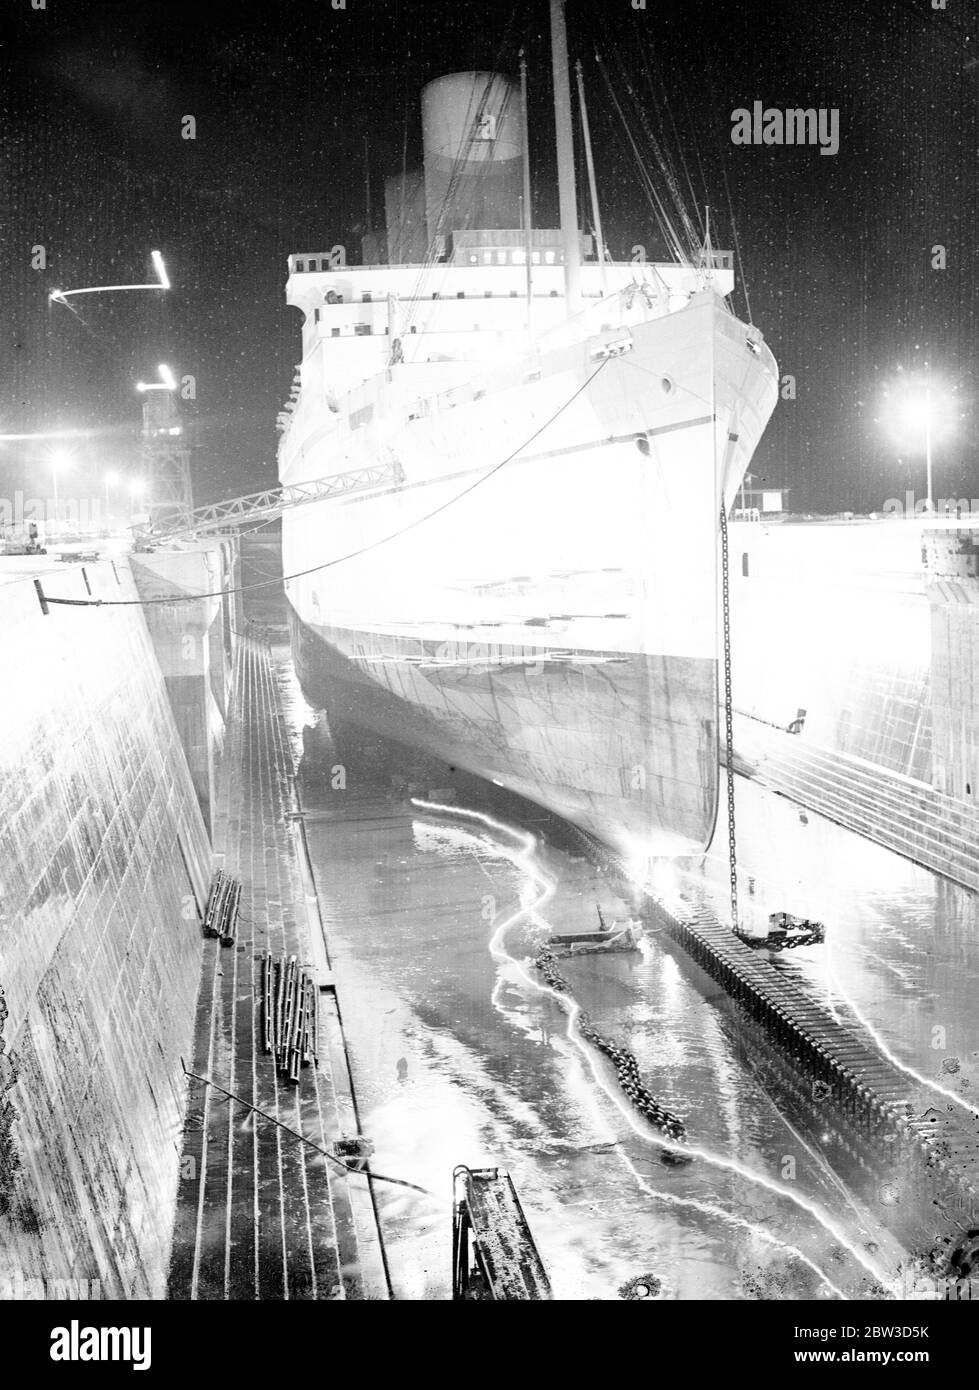 The Empress of Britain floodlighted . The plates in the bows of the Empress of Britain which were damaged when the ship came into collision with the Kafiristan in the St Lawrence River in the summer are being renewed in drydock at Southampton , where the liner is undergoing her annual overhaul . Photo shows , the Empress of Britian floodlighted in drydock at Southampton . 16 November 1935 Stock Photo